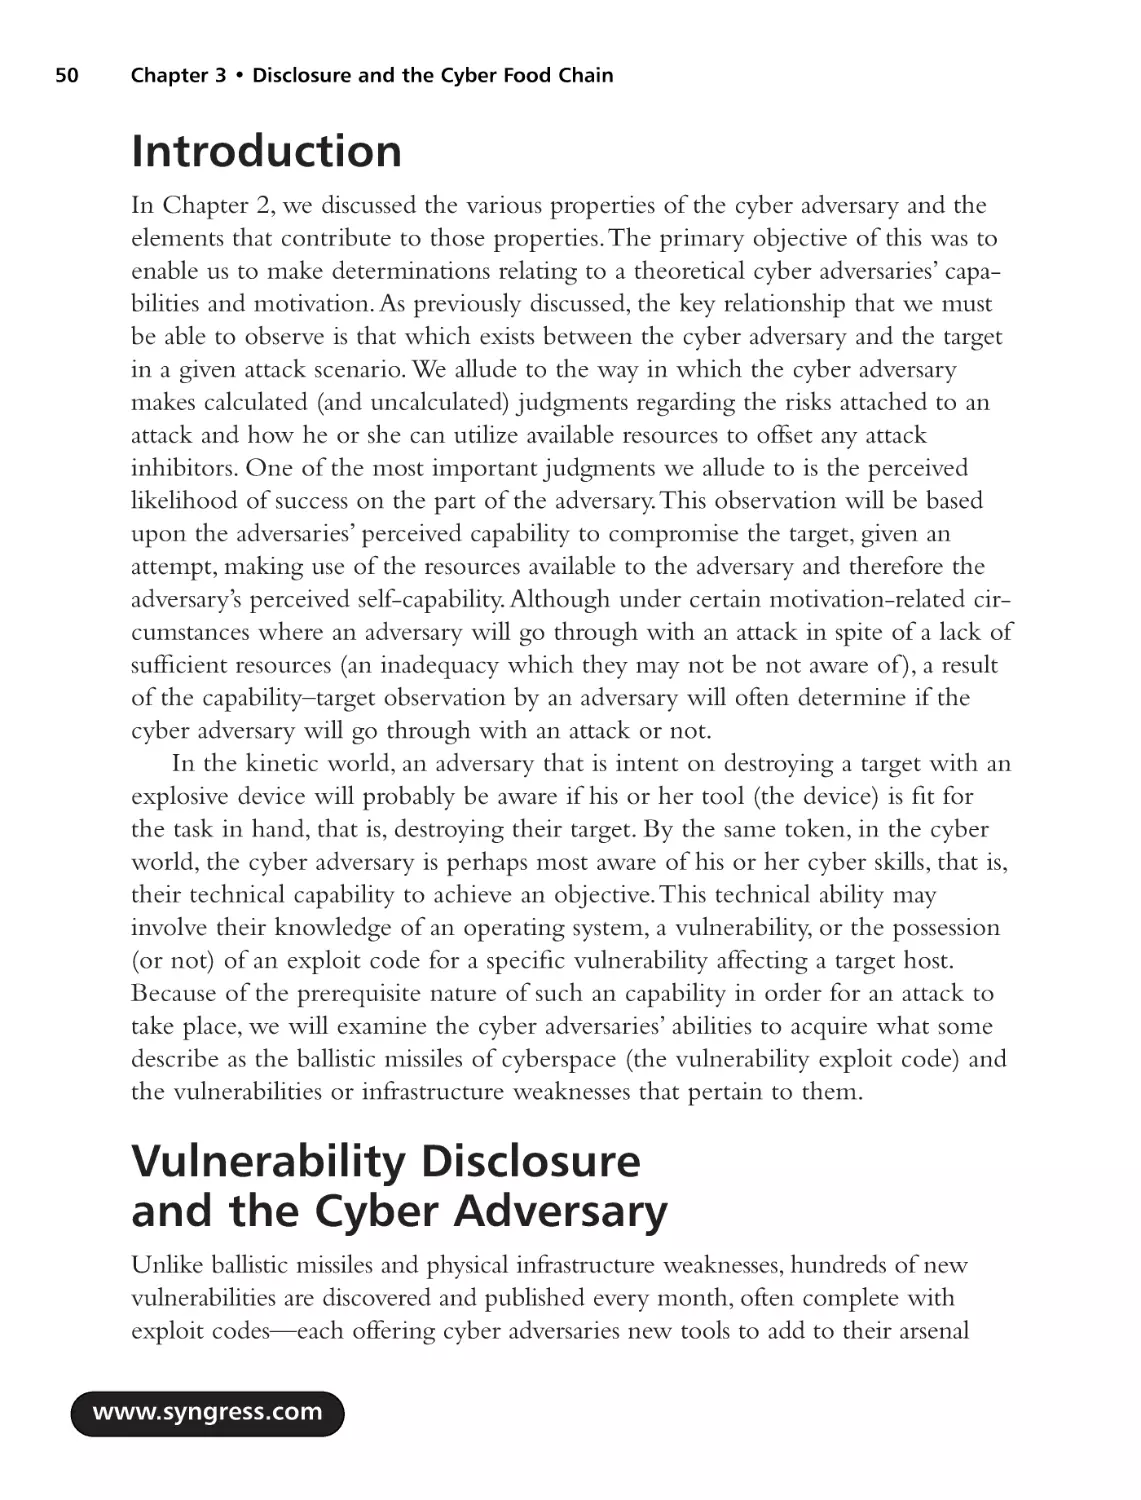 Introduction
Vulnerability Disclosure and the Cyber Adversary